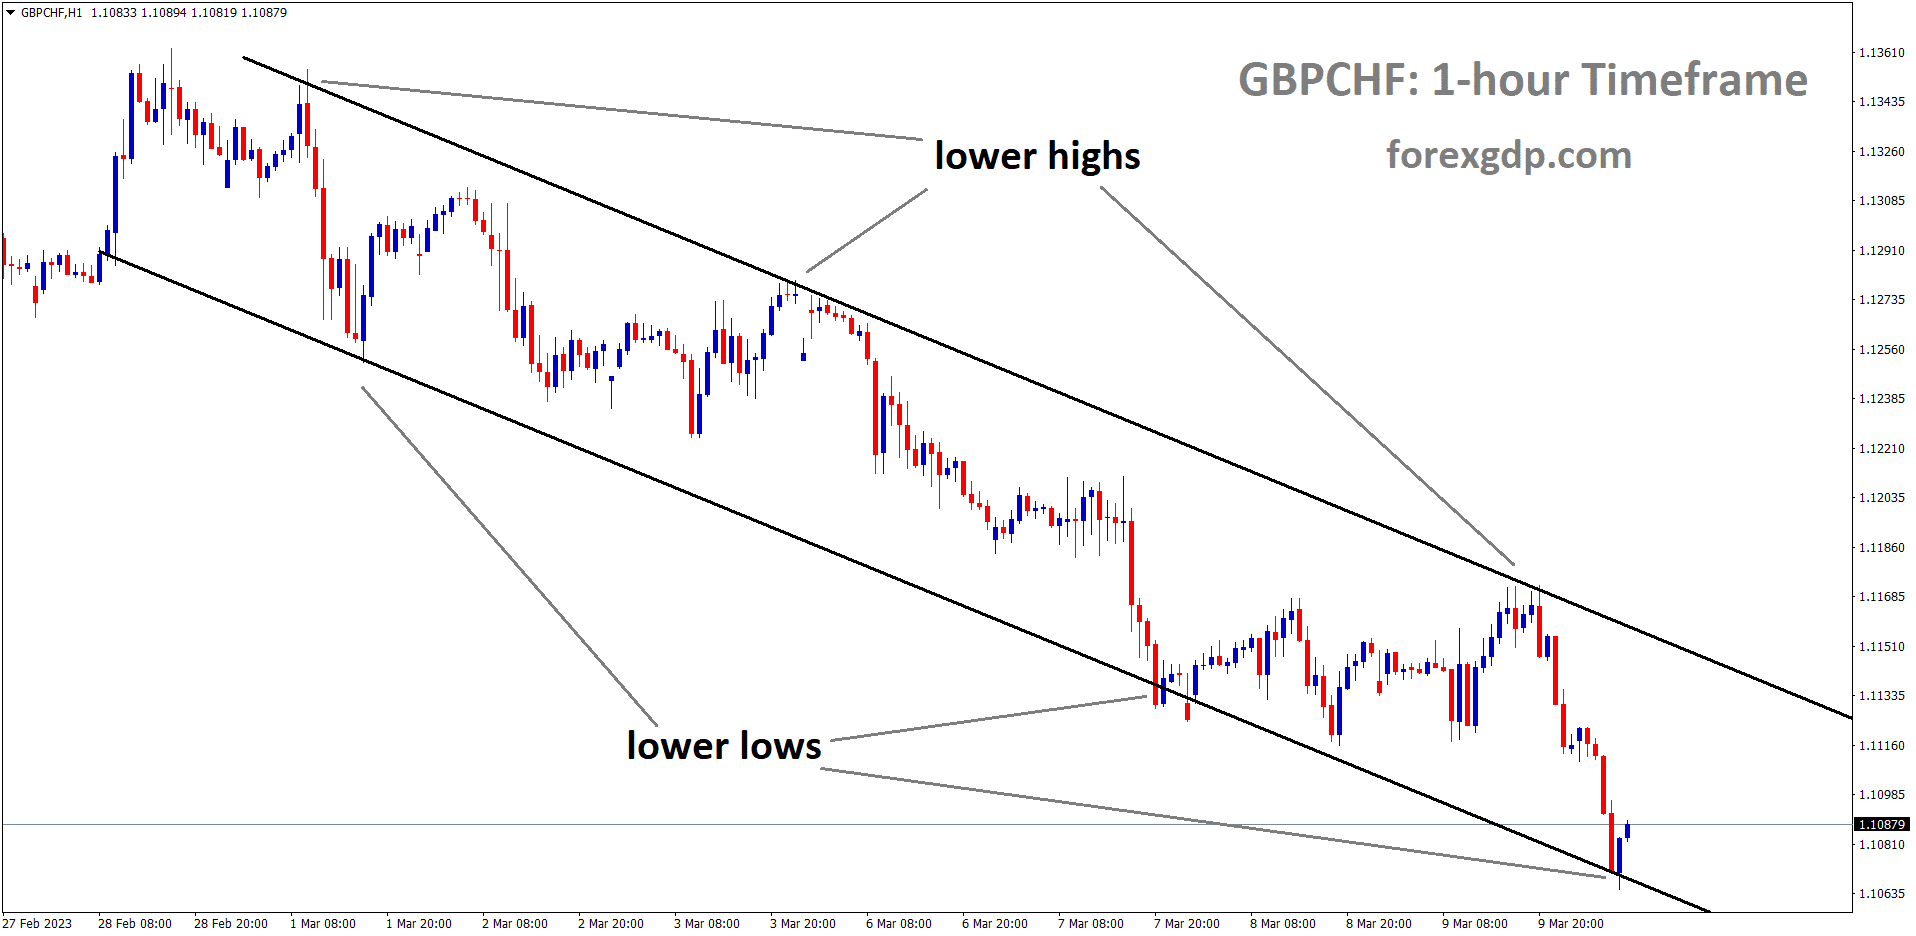 GBPCHF is moving in descending channel and the market has reached the lower low are of the channel.